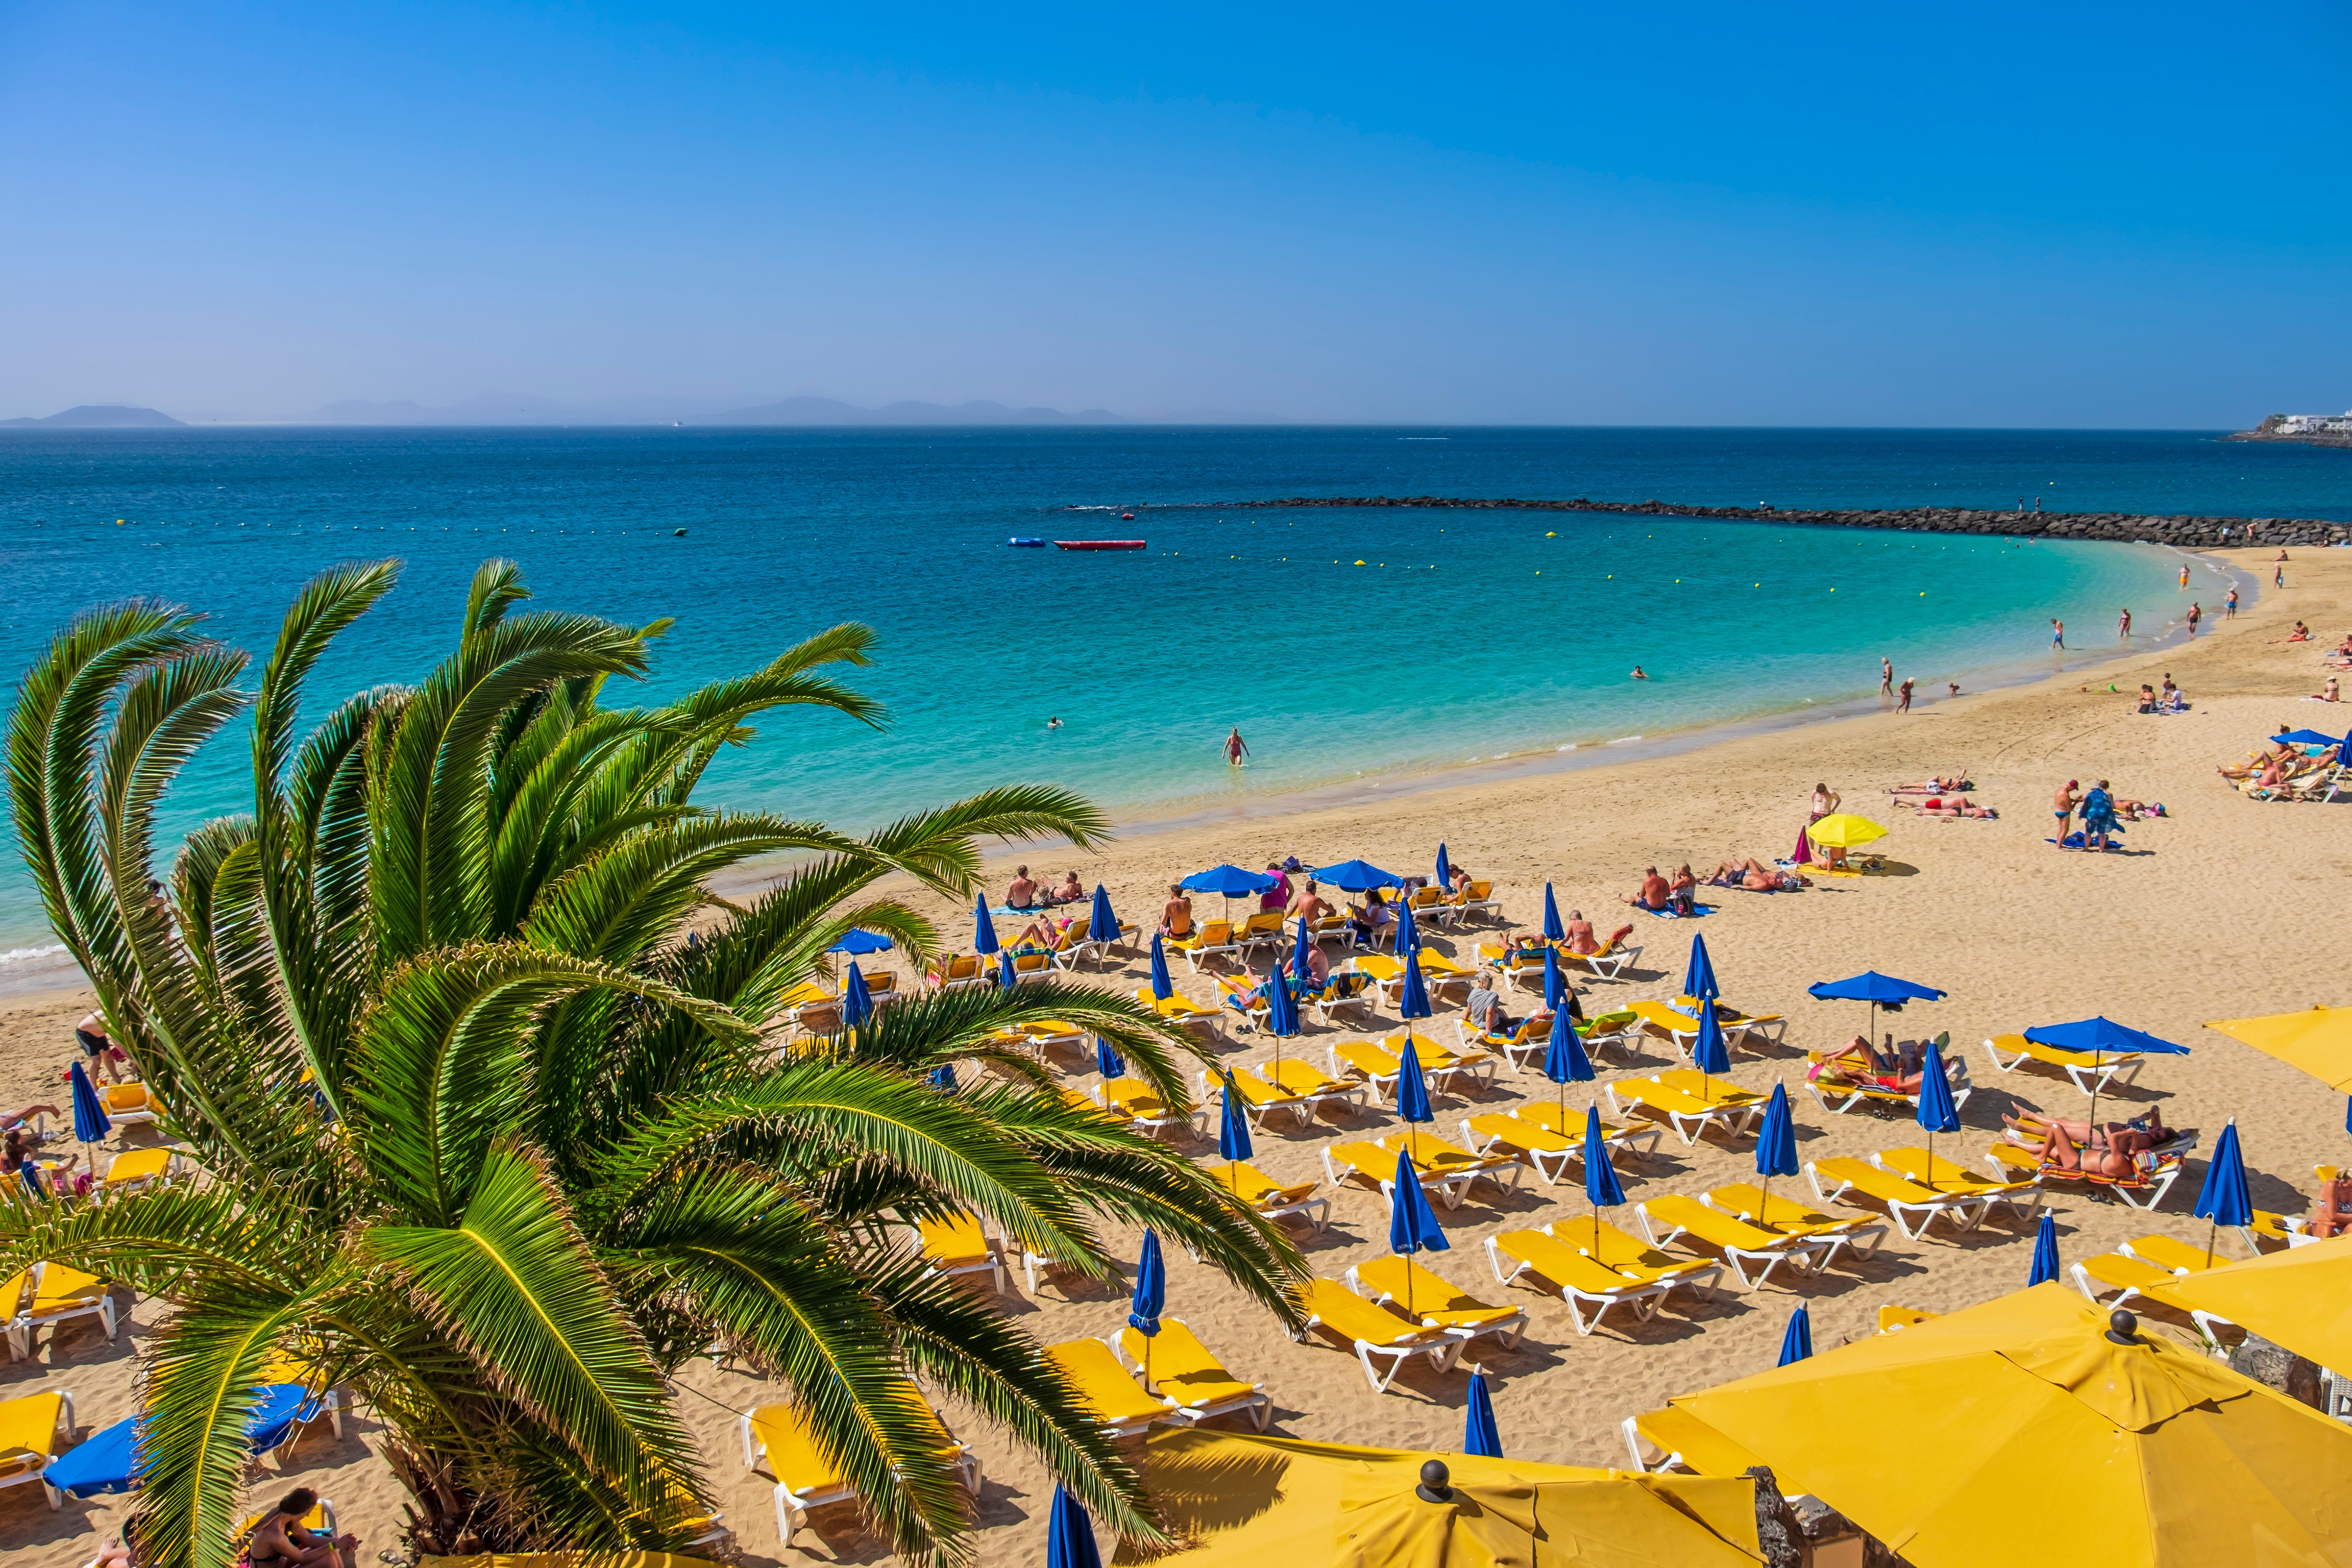 Playa Blanca in south Lanzarote is a tourist hotspot